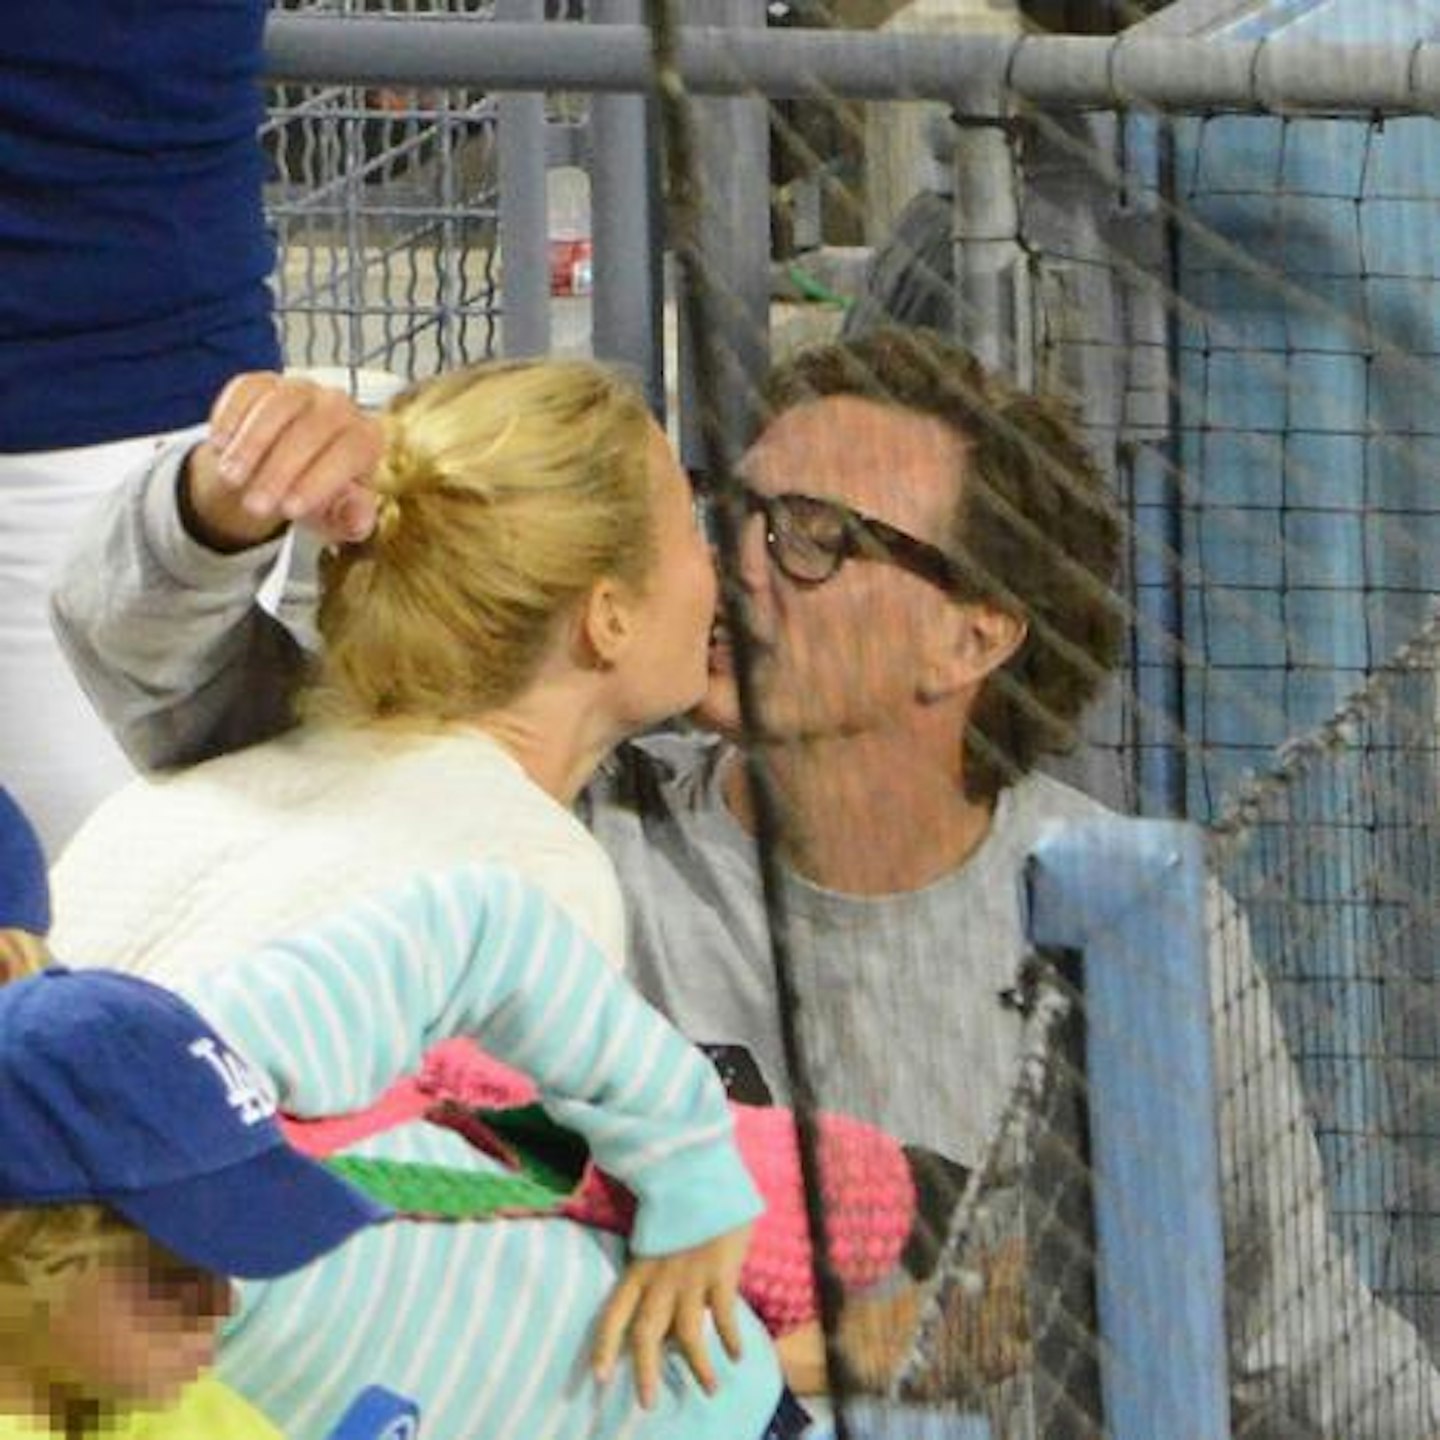 Gwyn and Donovan attended the Dodgers game along with her children